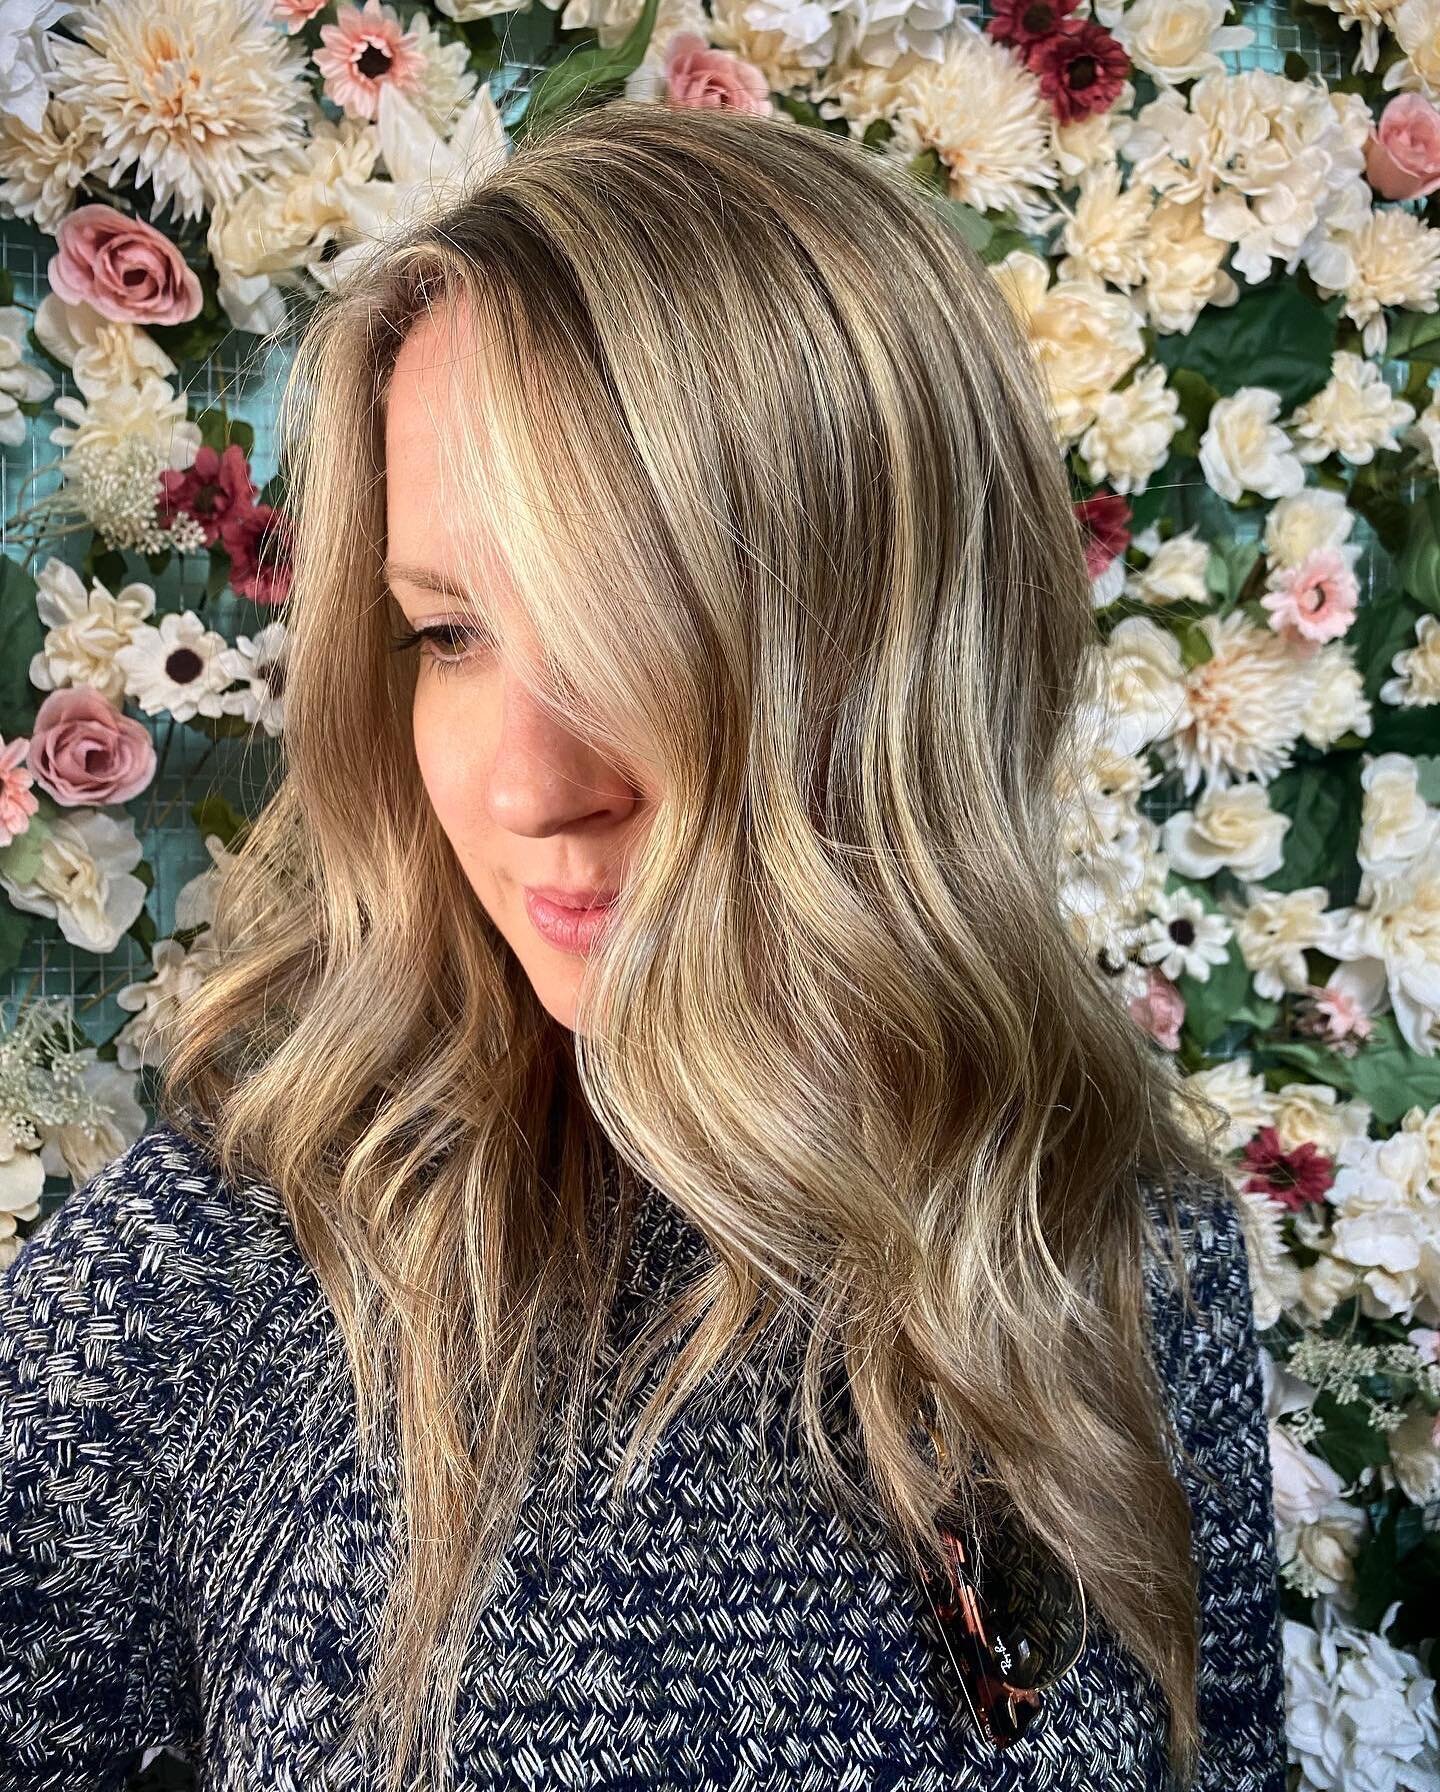 You can find this look under the definition of sunshine ☀️ 
Artist: @haylienhair 
.
.
.

#thewaywardparlor #southsideatlhair #atlhaircolor #westendbestendatl #atlhairwitch #haylienhair #teamwaywardparlor #atlhaircolorist #atlhairmagic #southsideatlha